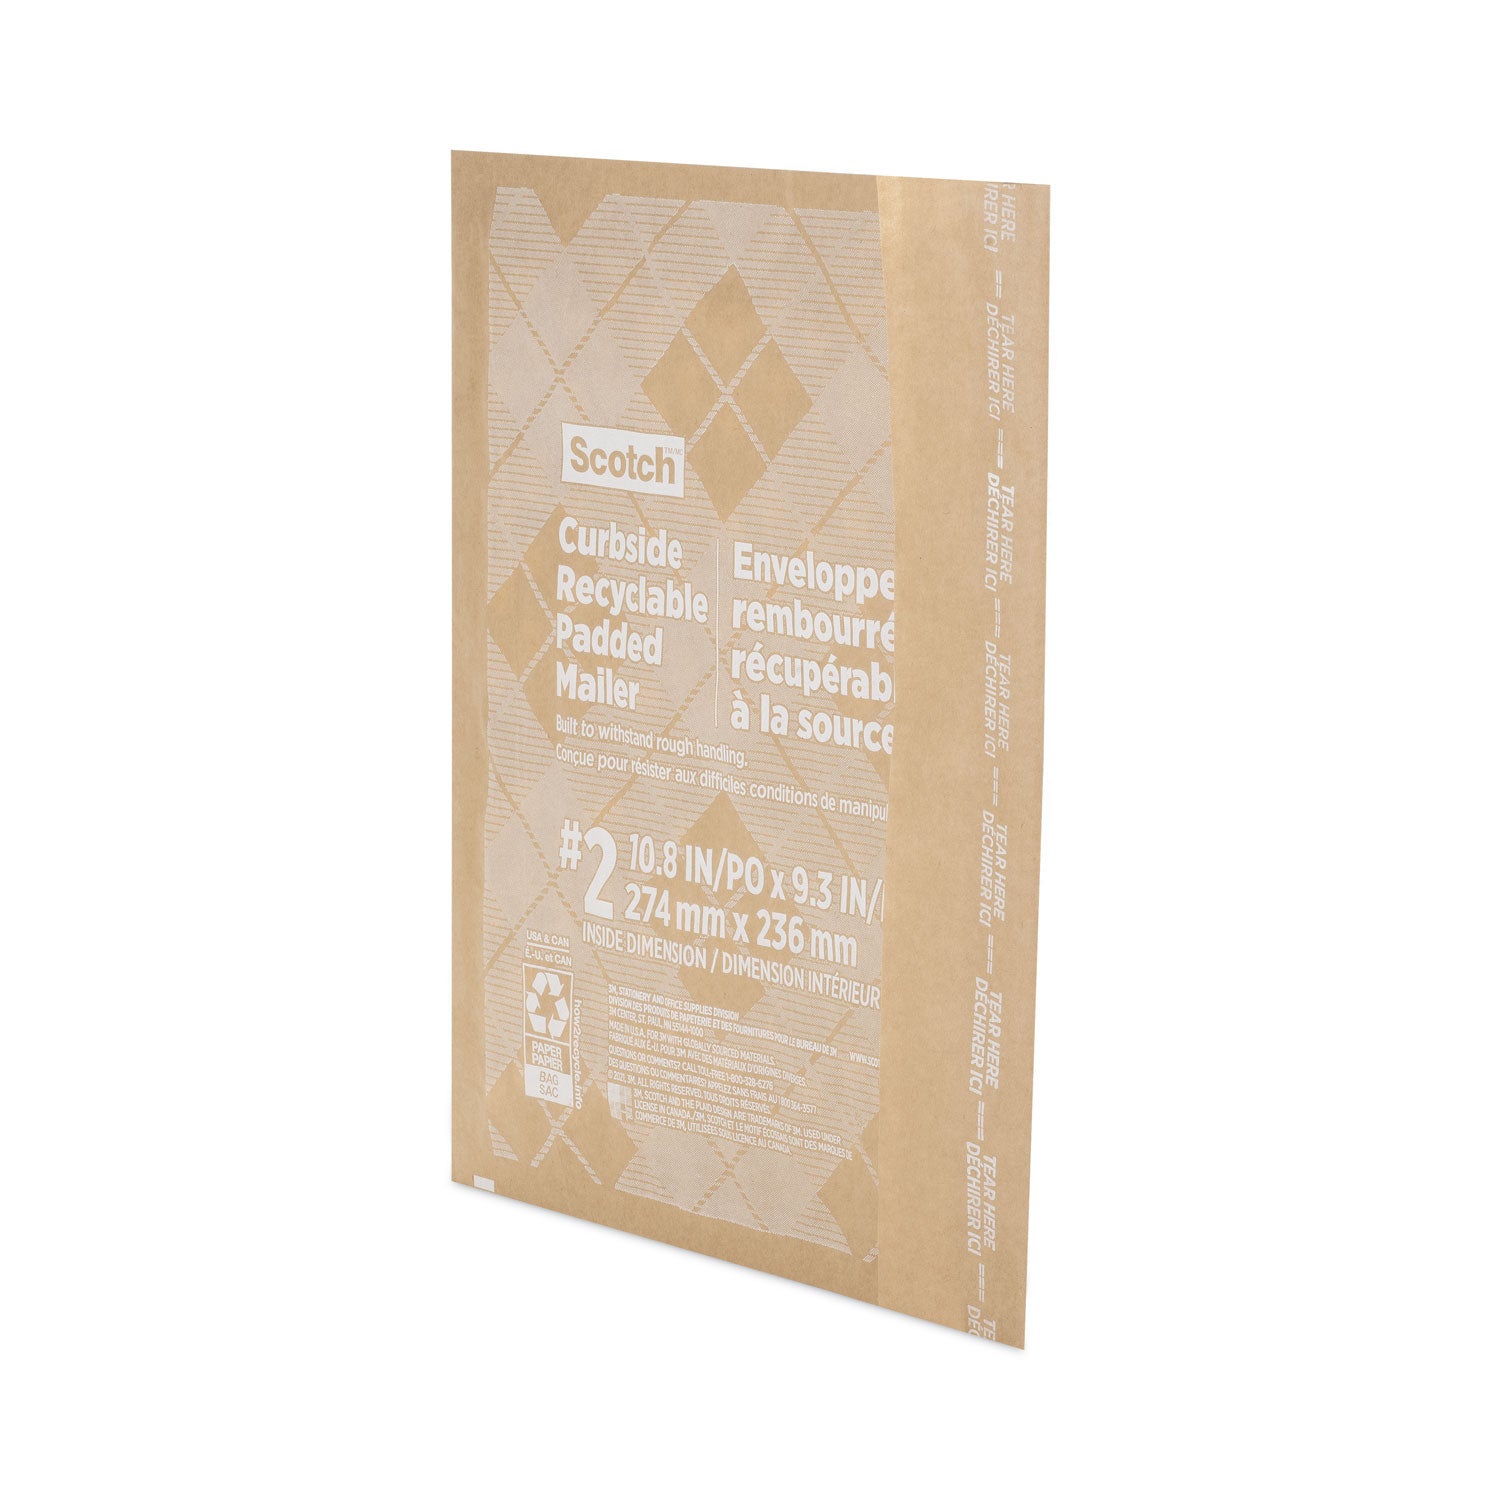 curbside-recyclable-padded-mailer-#2-bubble-cushion-self-adhesive-closure-1125-x-12-natural-kraft-100-carton_mmmcr21 - 3